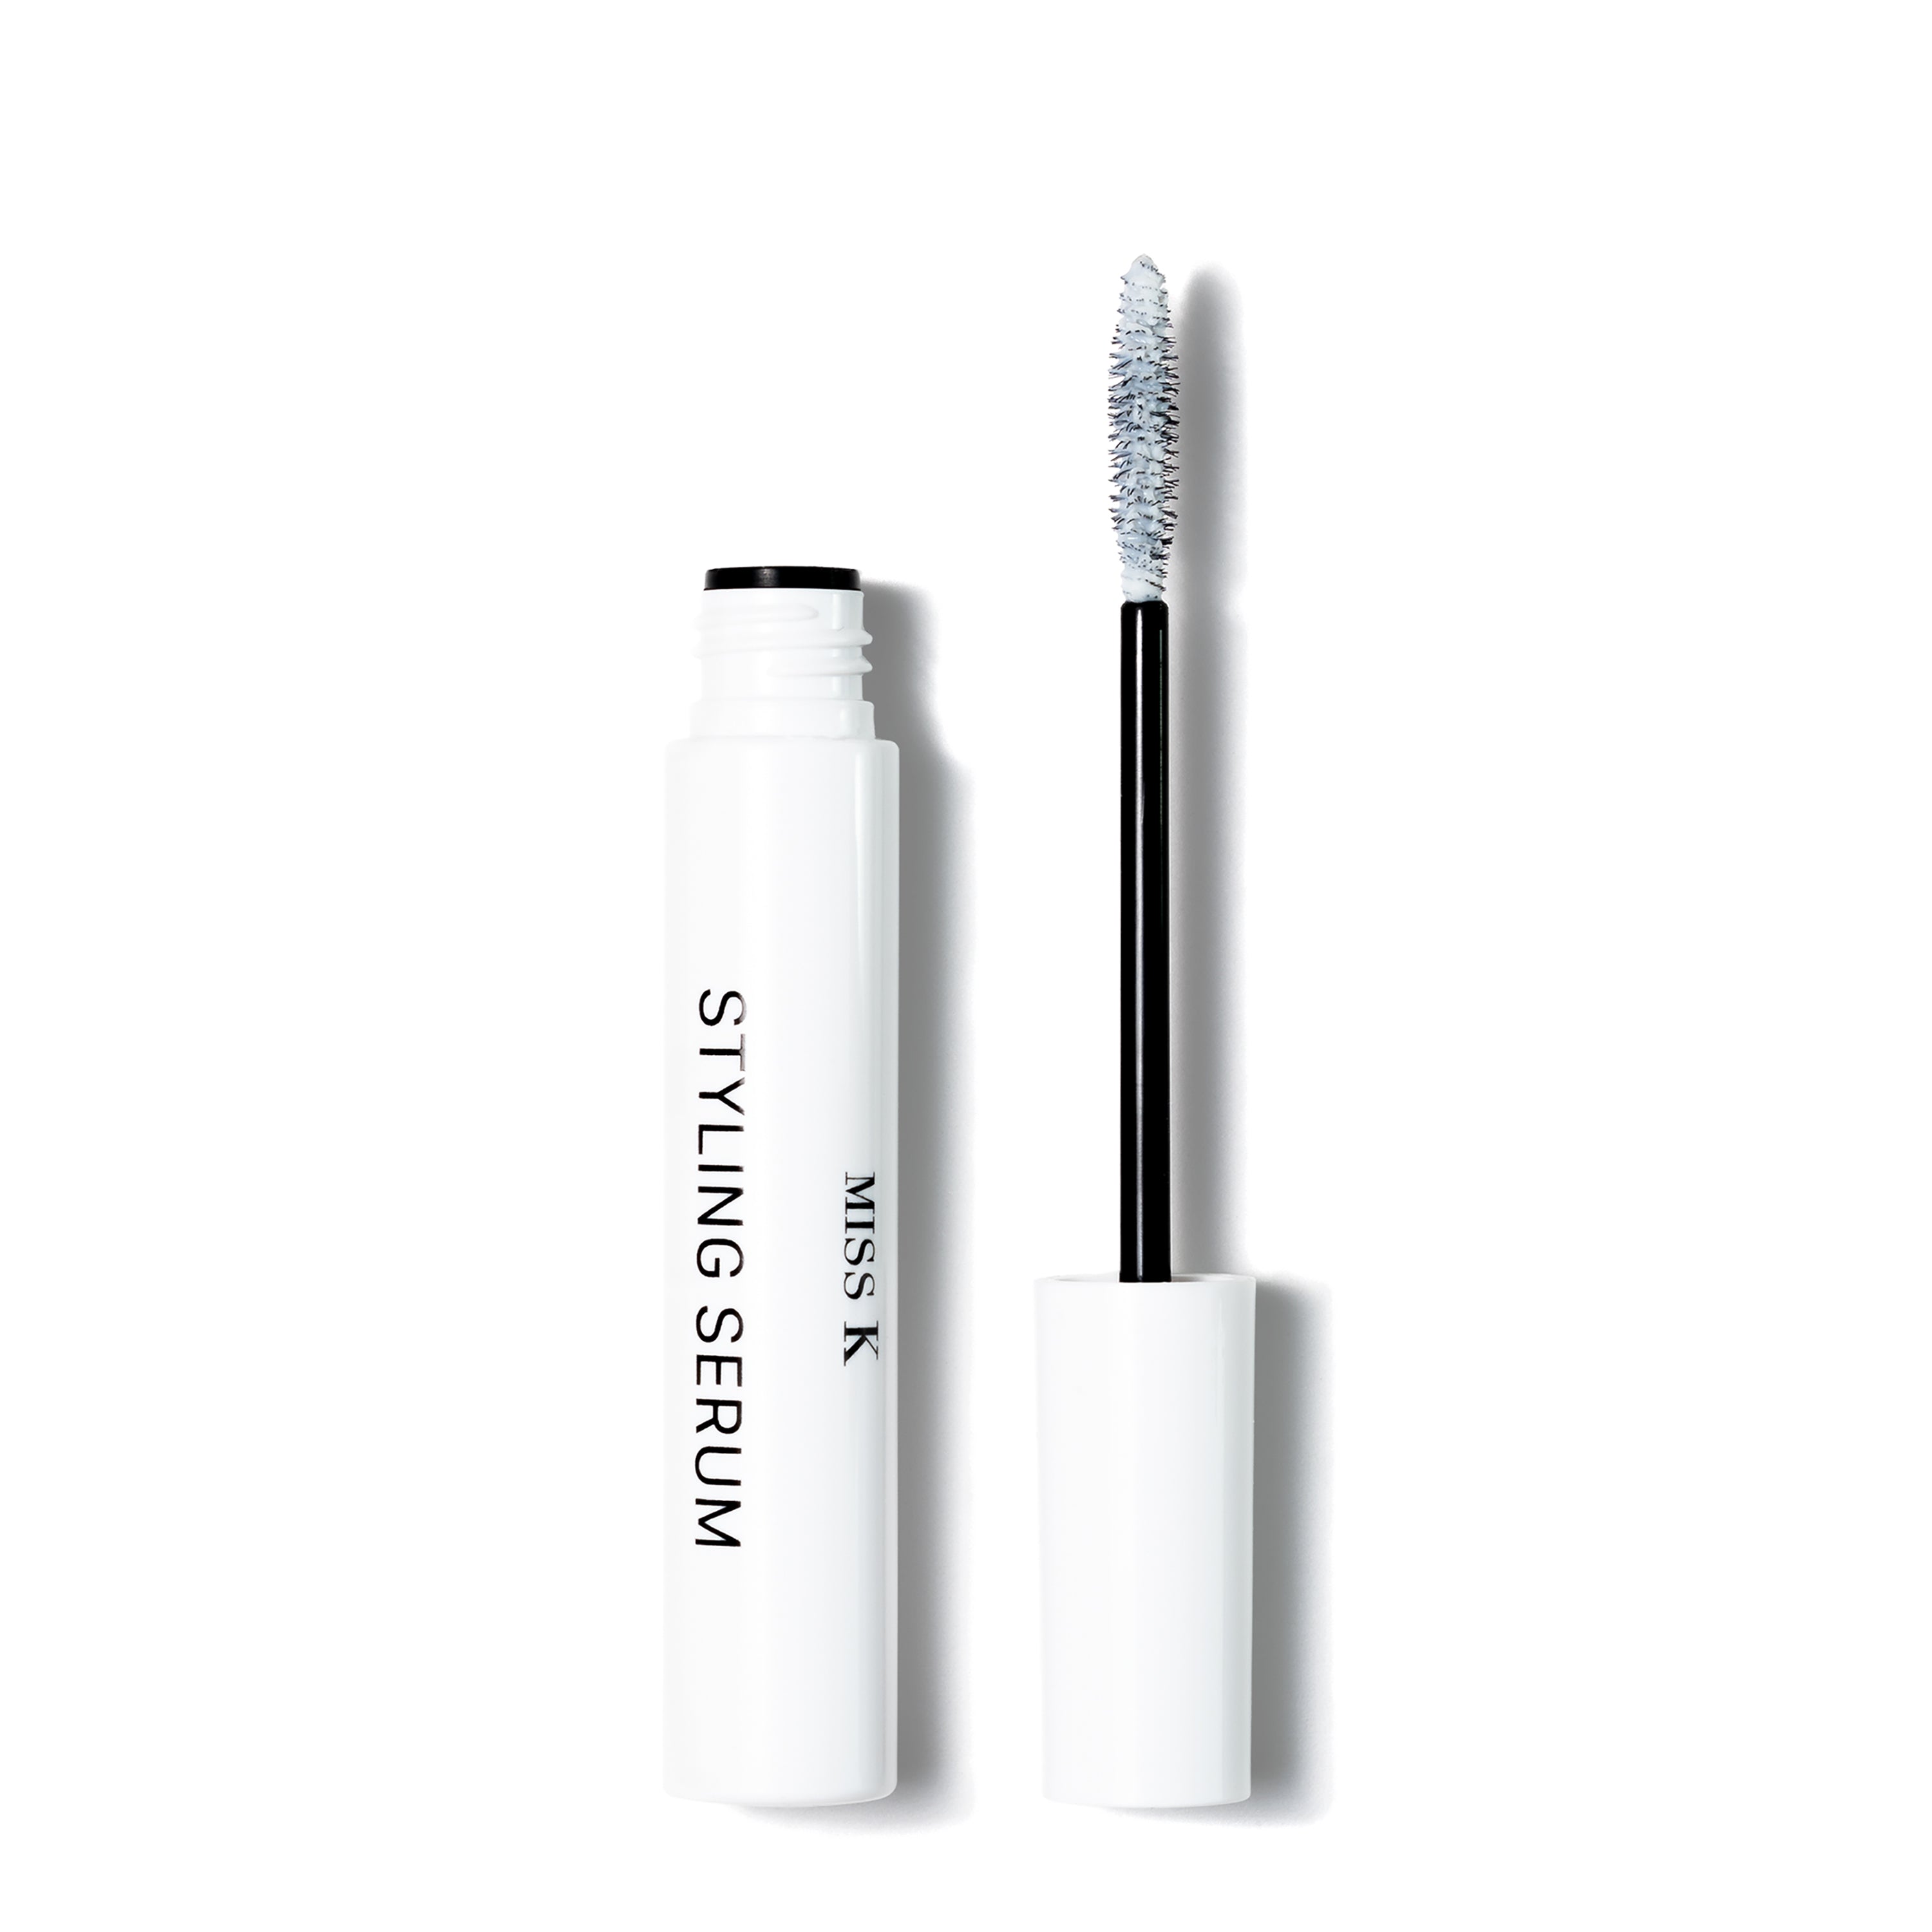 The Eyelash-Curling System Duo